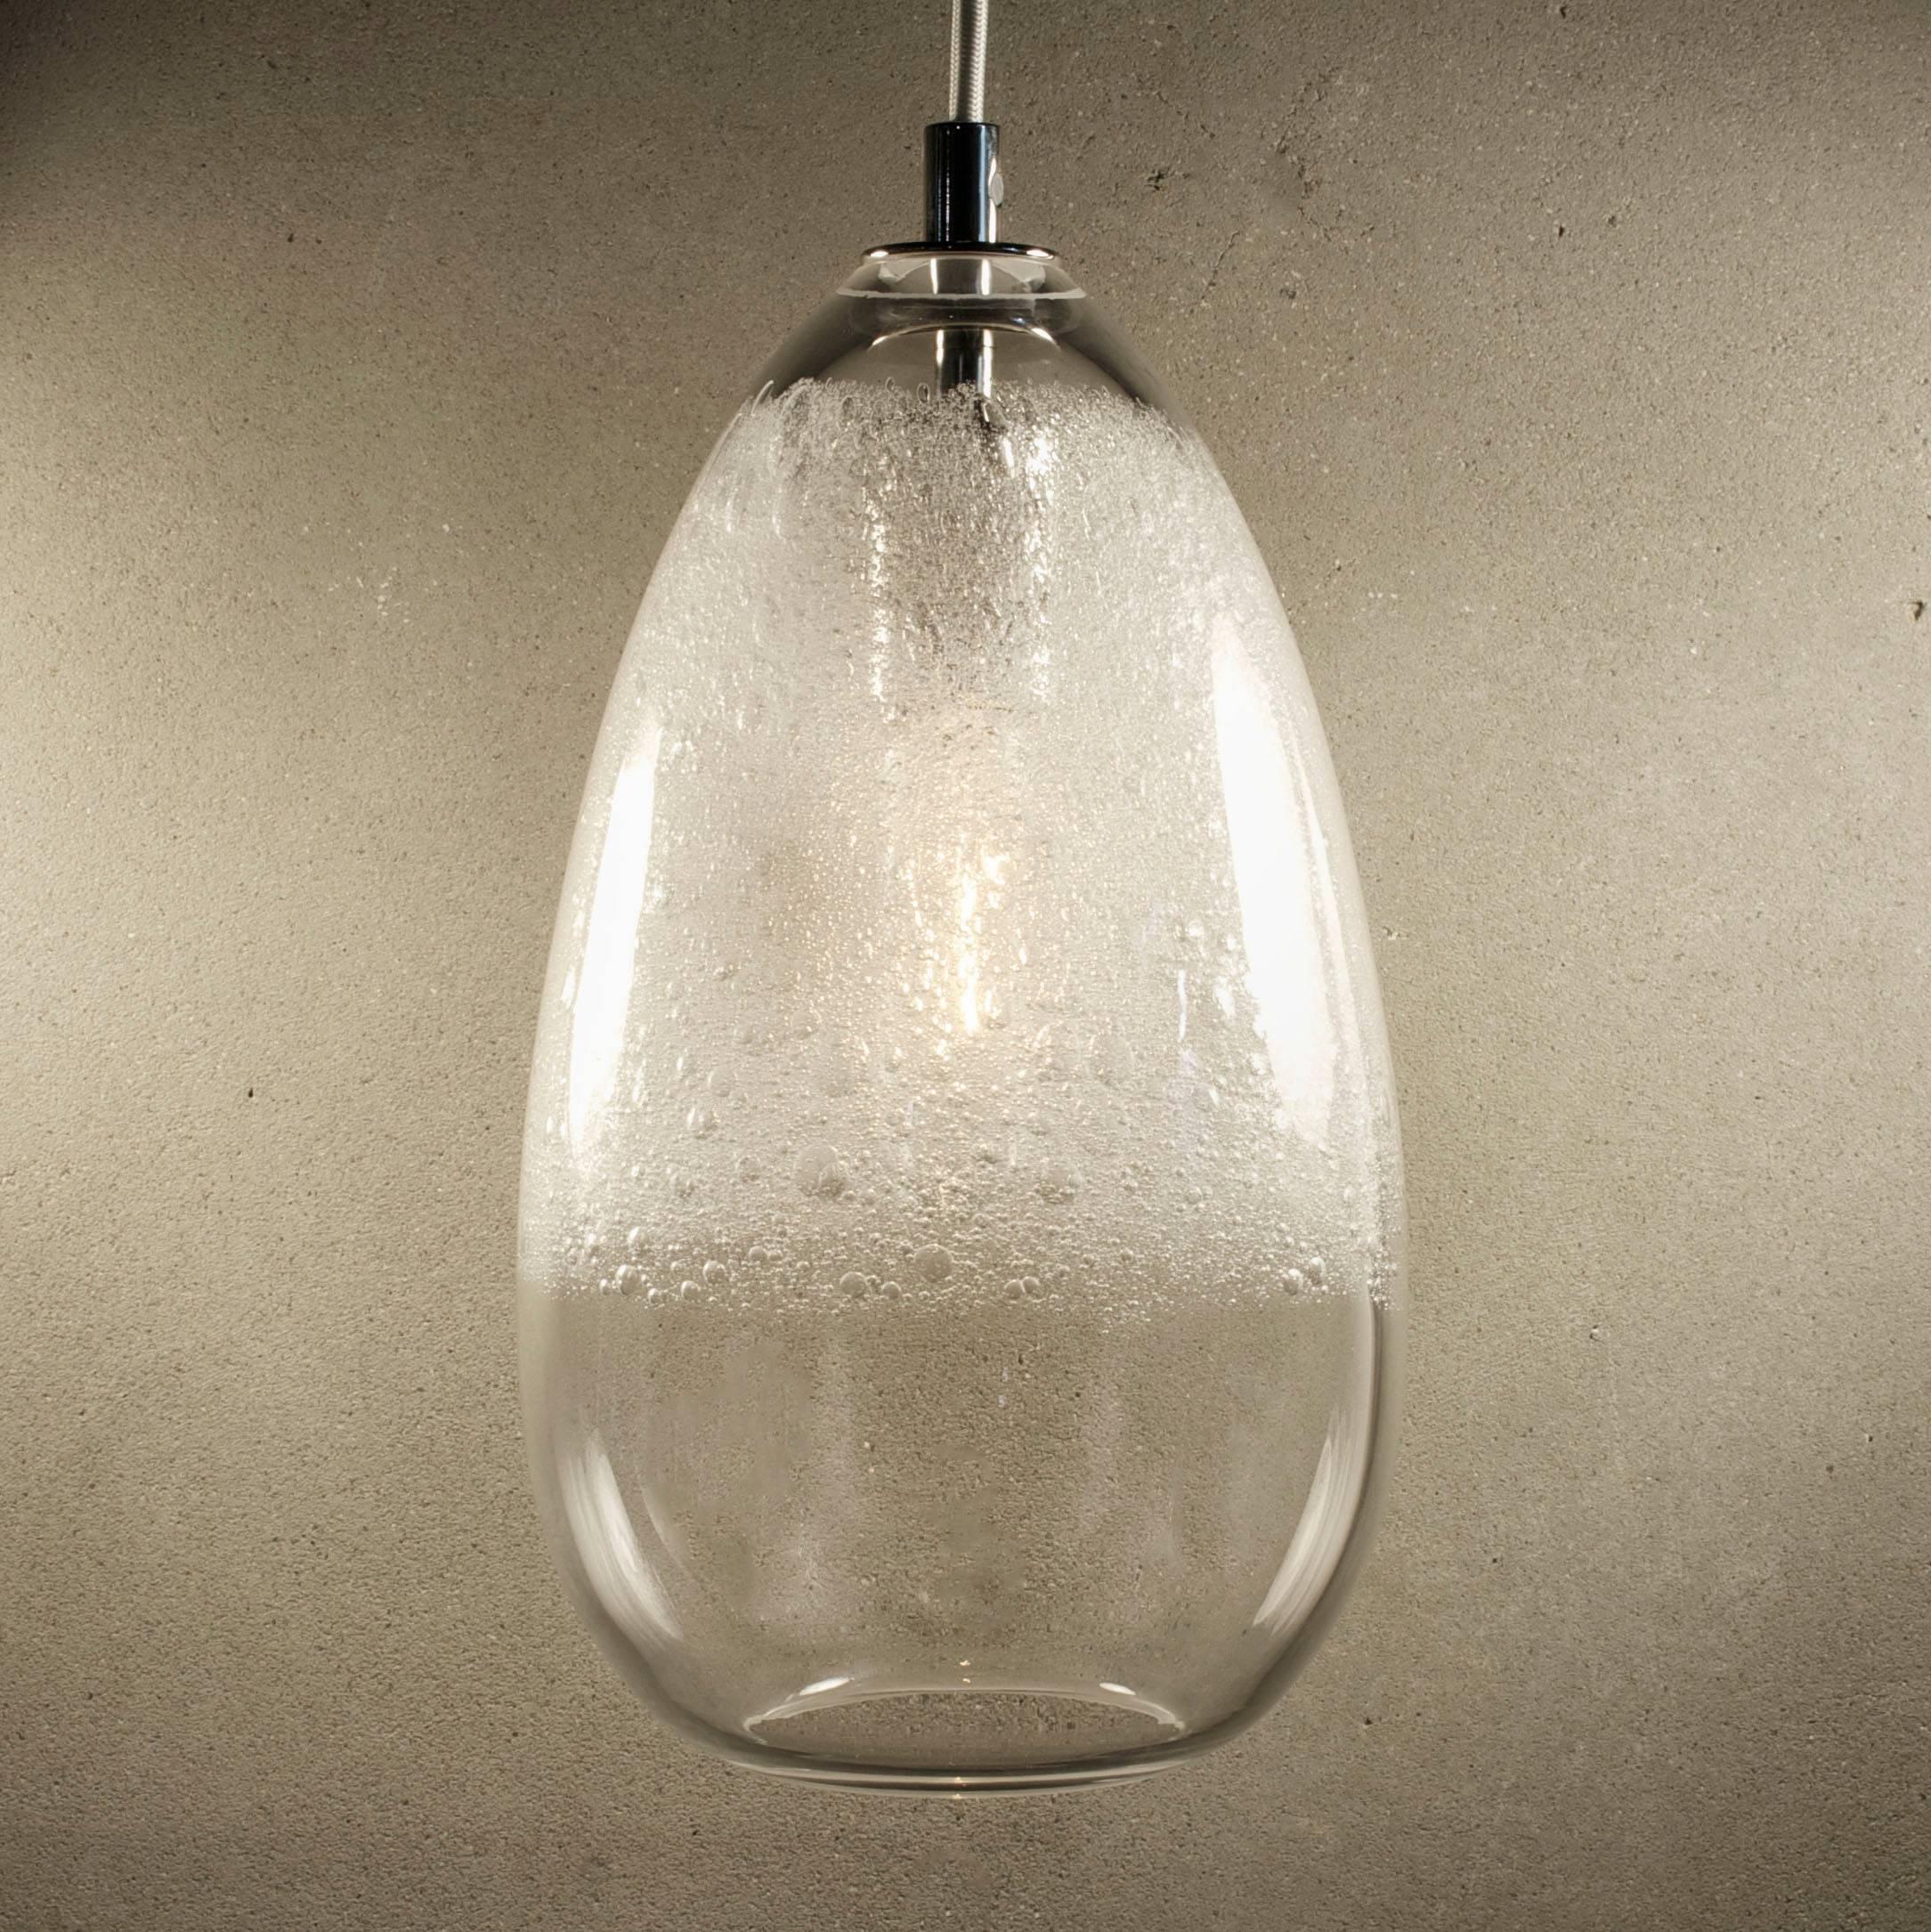 These works continue the language of contrast of the lattimo and banded lines, but use a swath of textured whipped glass. This is then paired with a selection of soft colors and simple forms. The bubbles cloud and diffuse the bulb and add elements